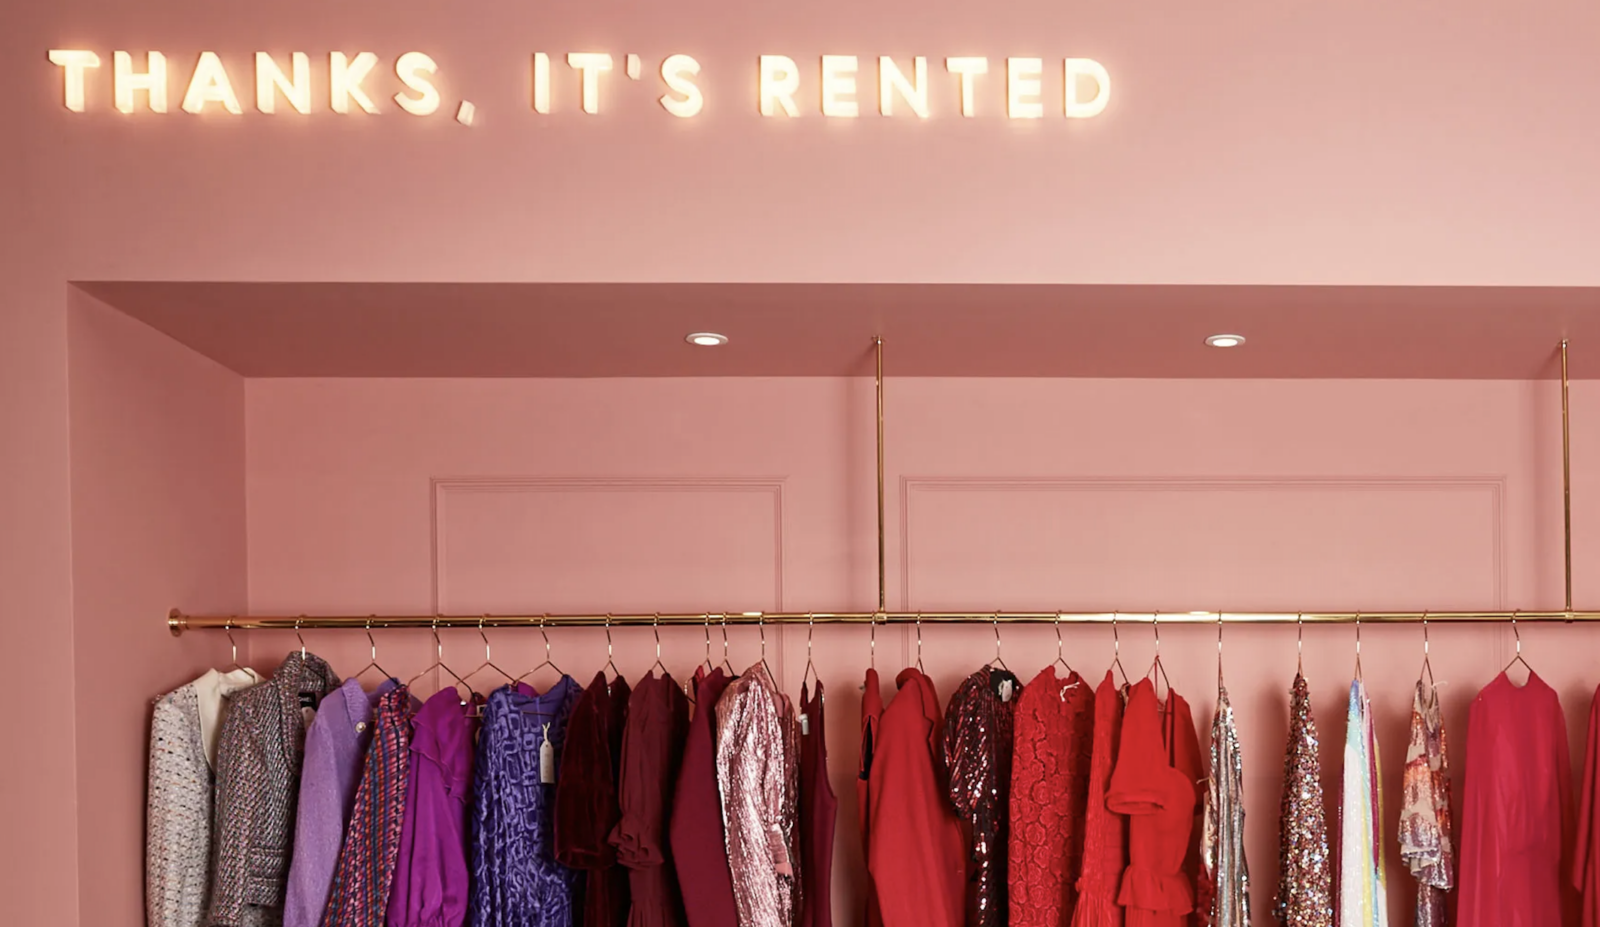 Clothing on a rack under a sign that says, "Thanks, It's Rented."